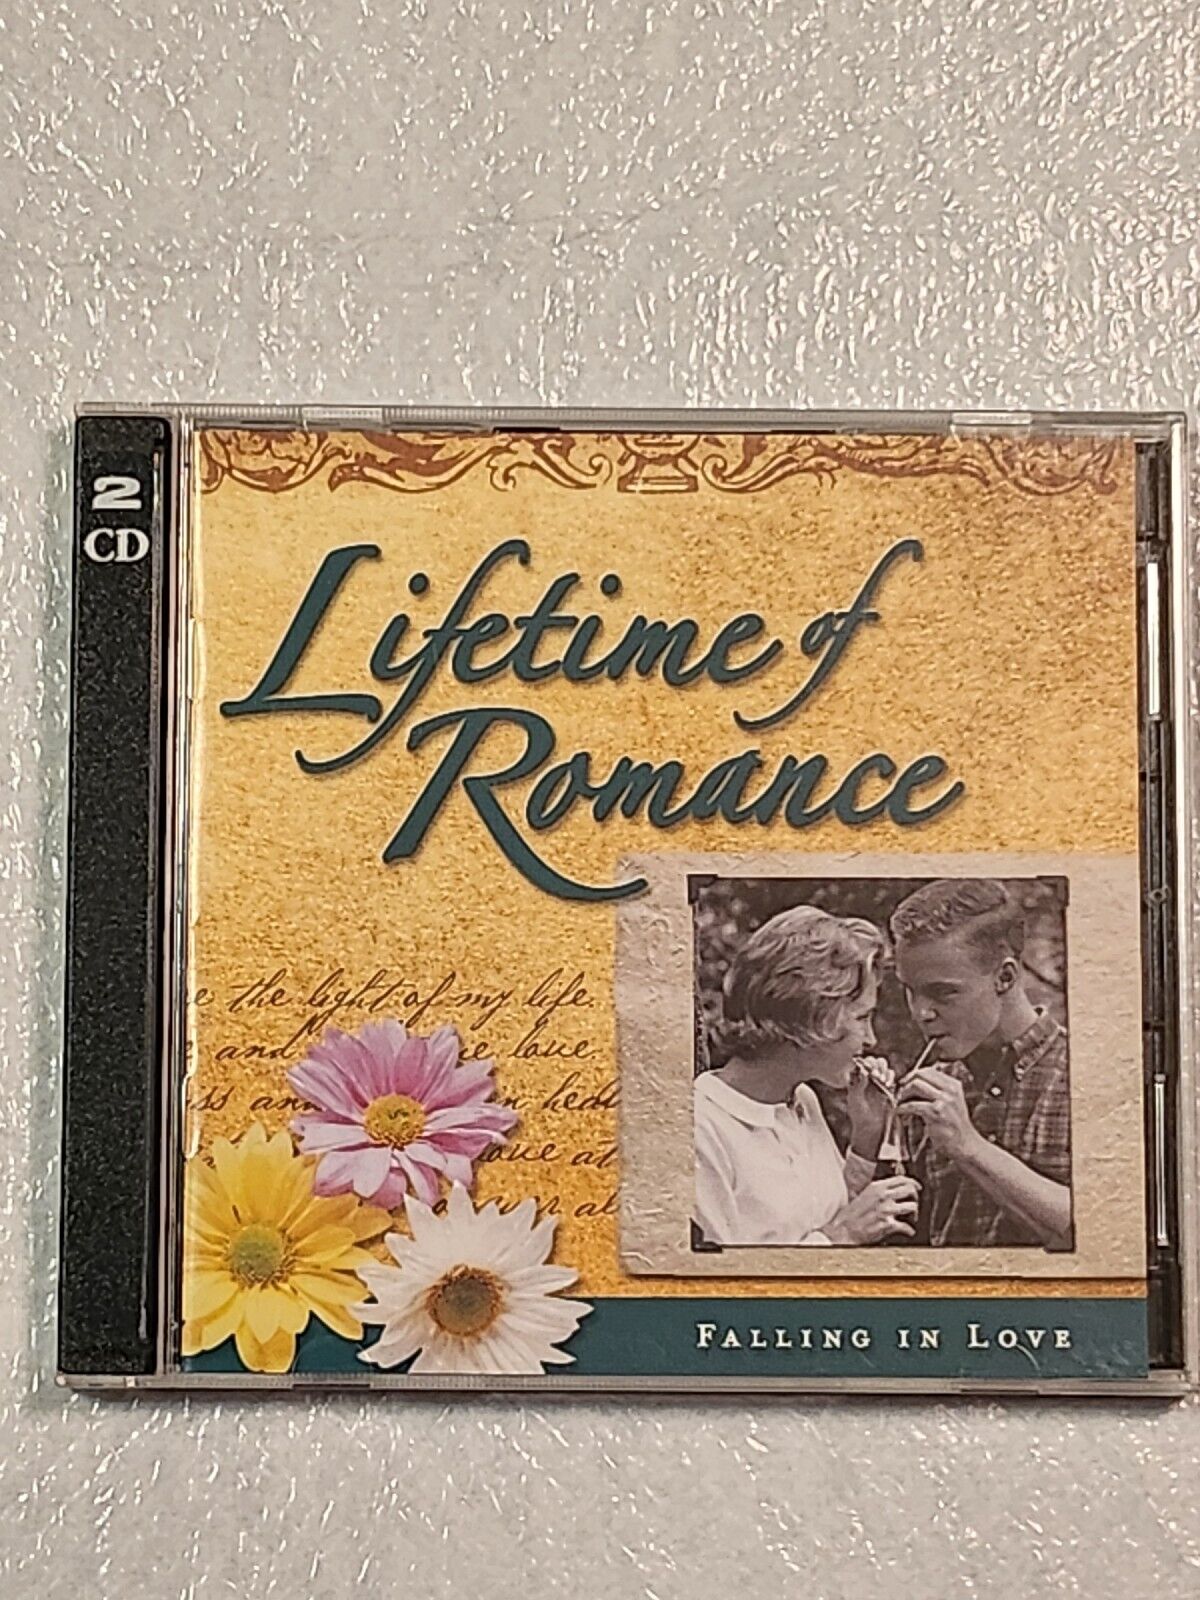 Time Life - Lifetime Of Romance: Falling In Love 2 CD Set - 30 Hits!